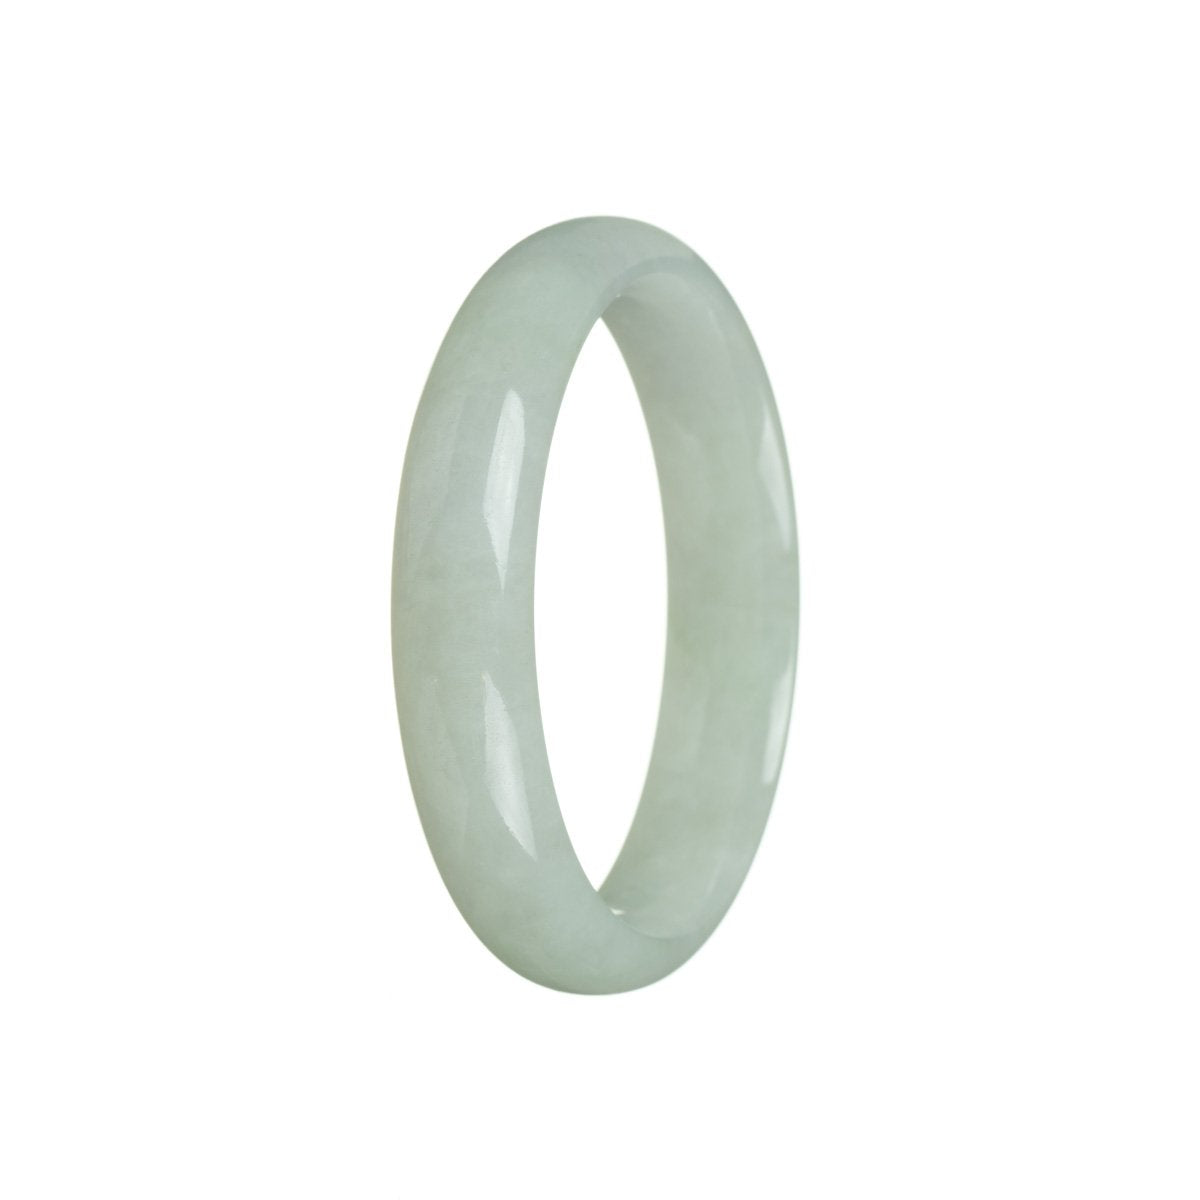 A pale green jadeite jade bangle with a half moon shape, untreated and authentic.